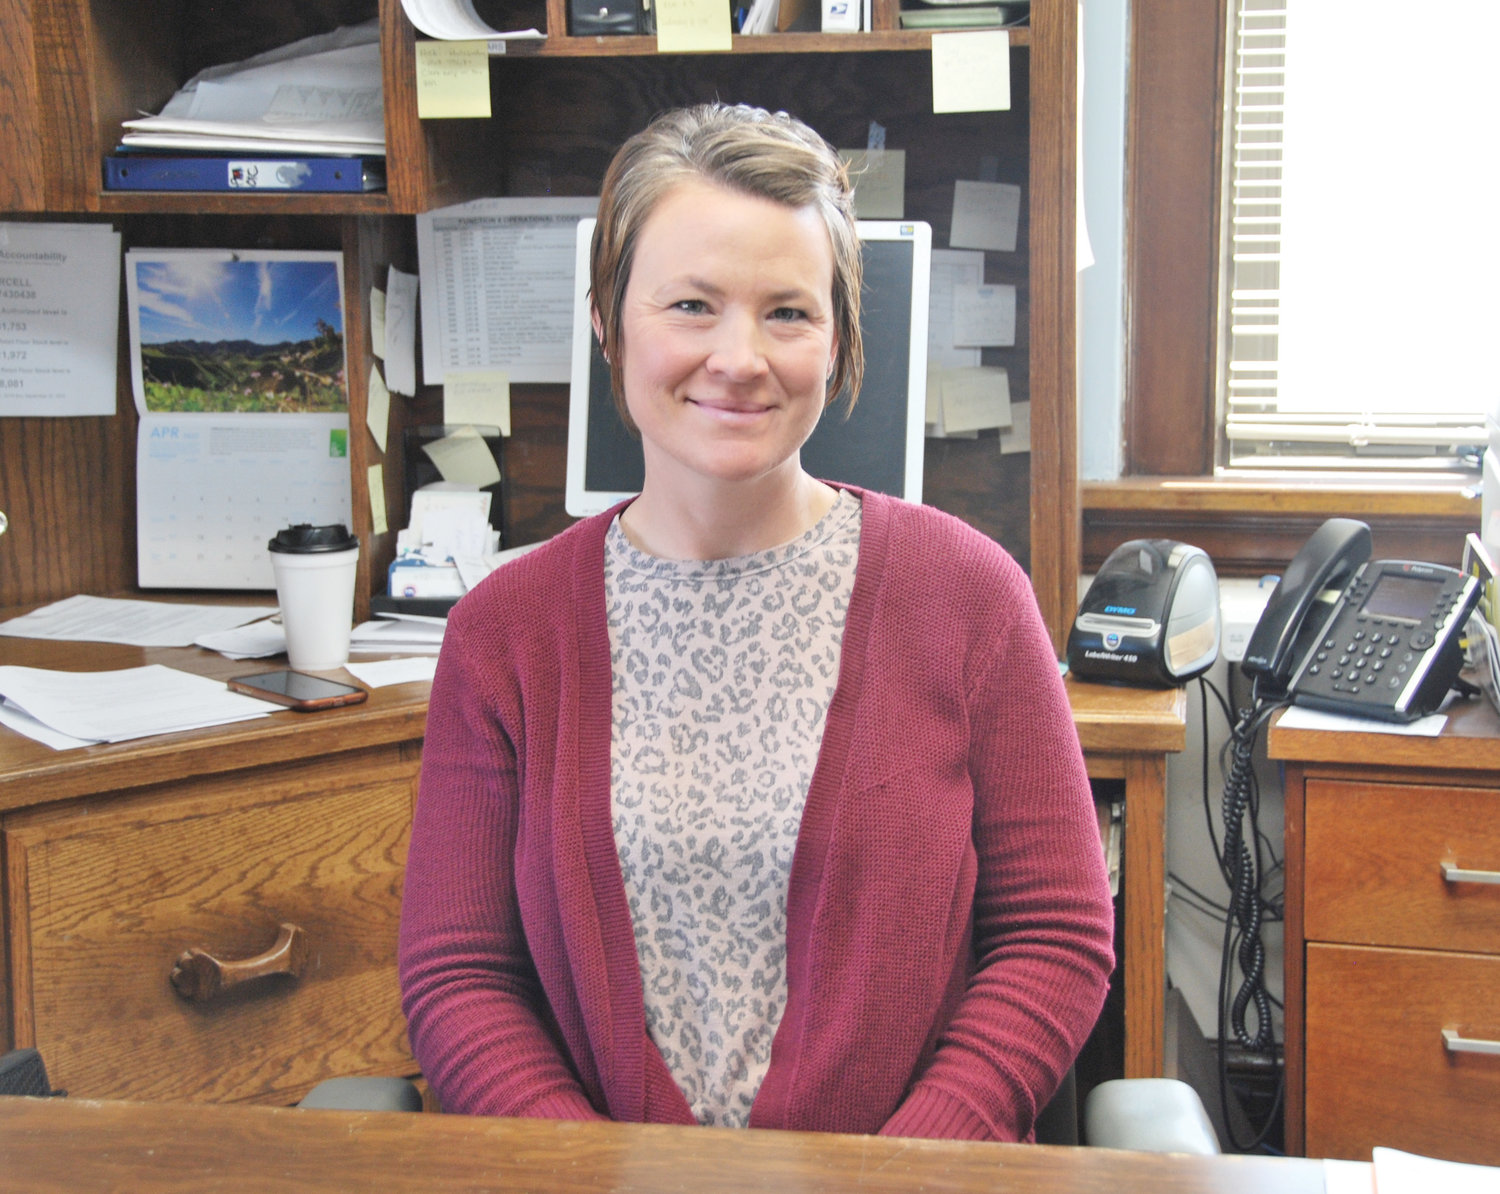 Teanna Giles will officially become the new Purcell Postmaster April 9. She has been serving in an interim capacity for the past few weeks.